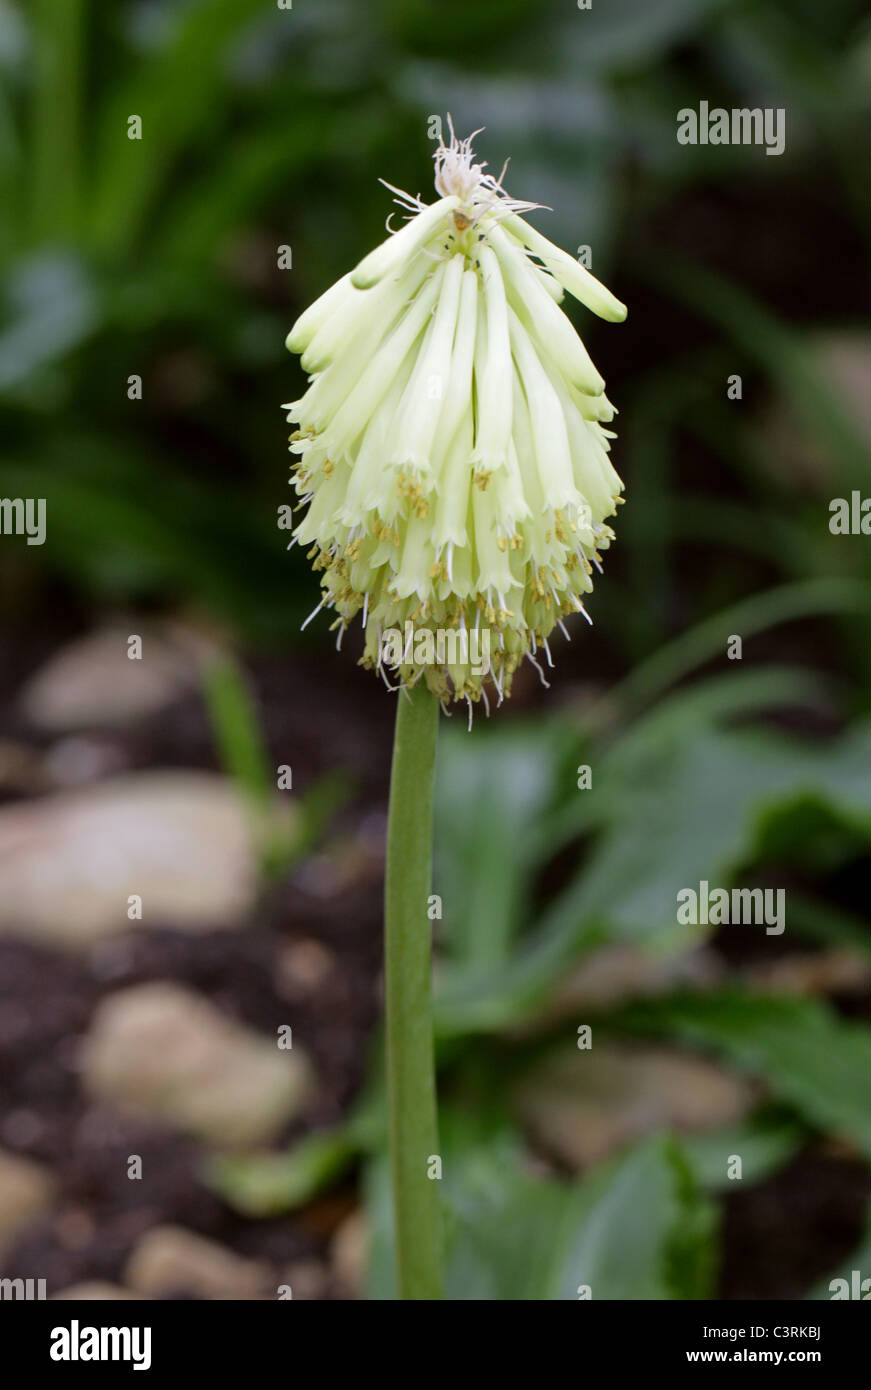 Forest Lily or Sand Onion, Veltheimia bracteata, Hyacinthaceae. Cape Province, South Africa. Stock Photo